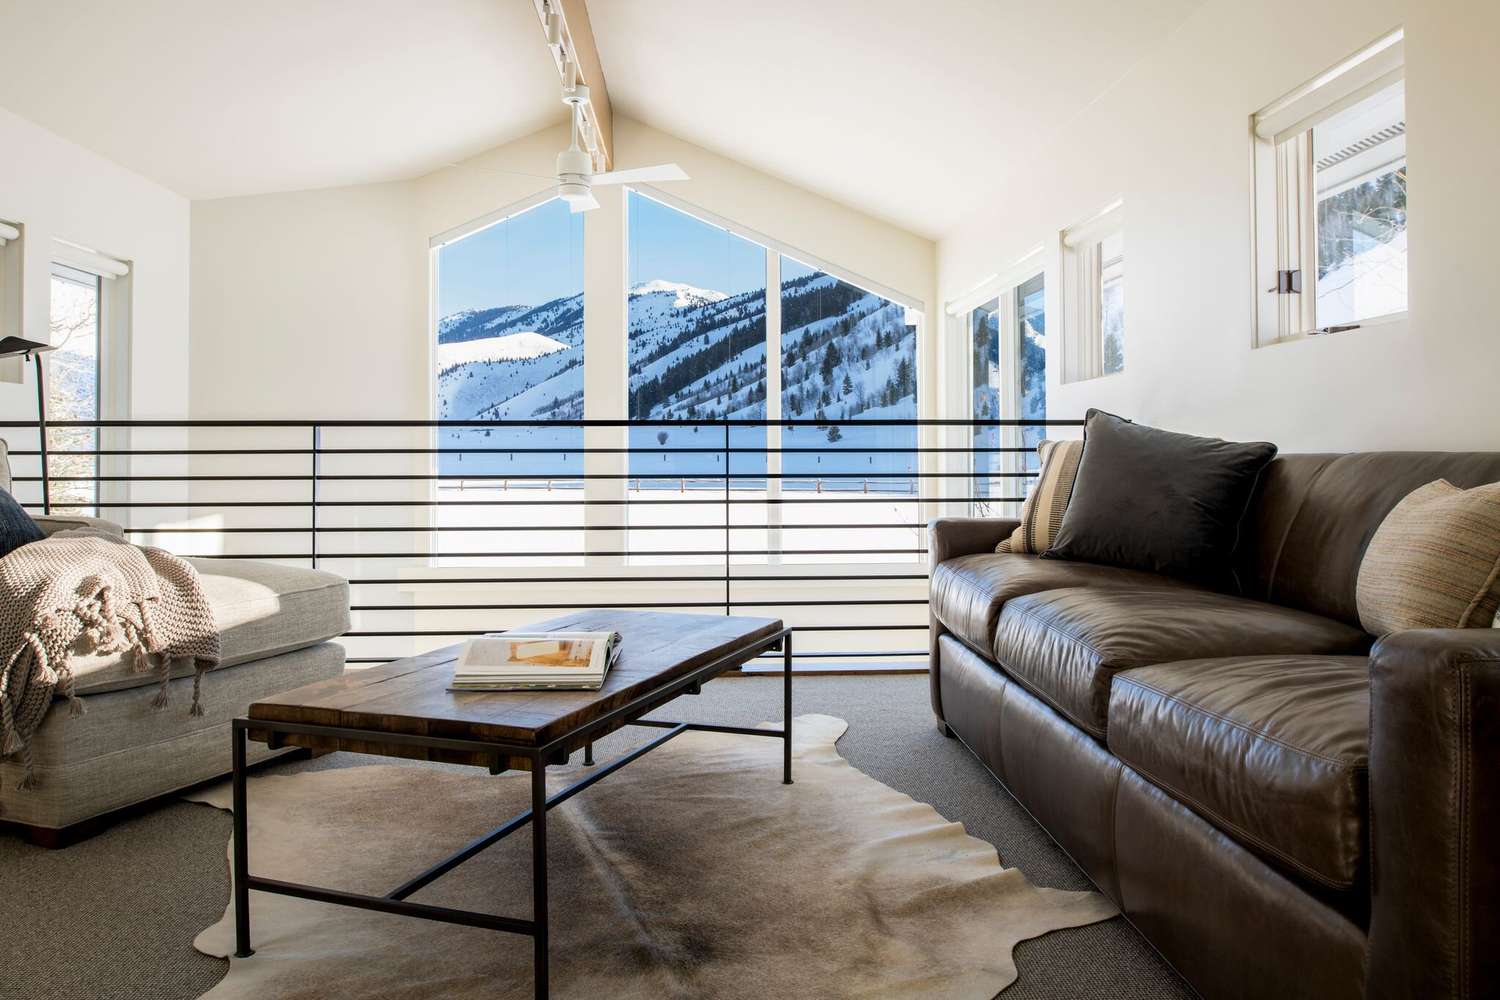 Latham Interiors picture windows framing mountains